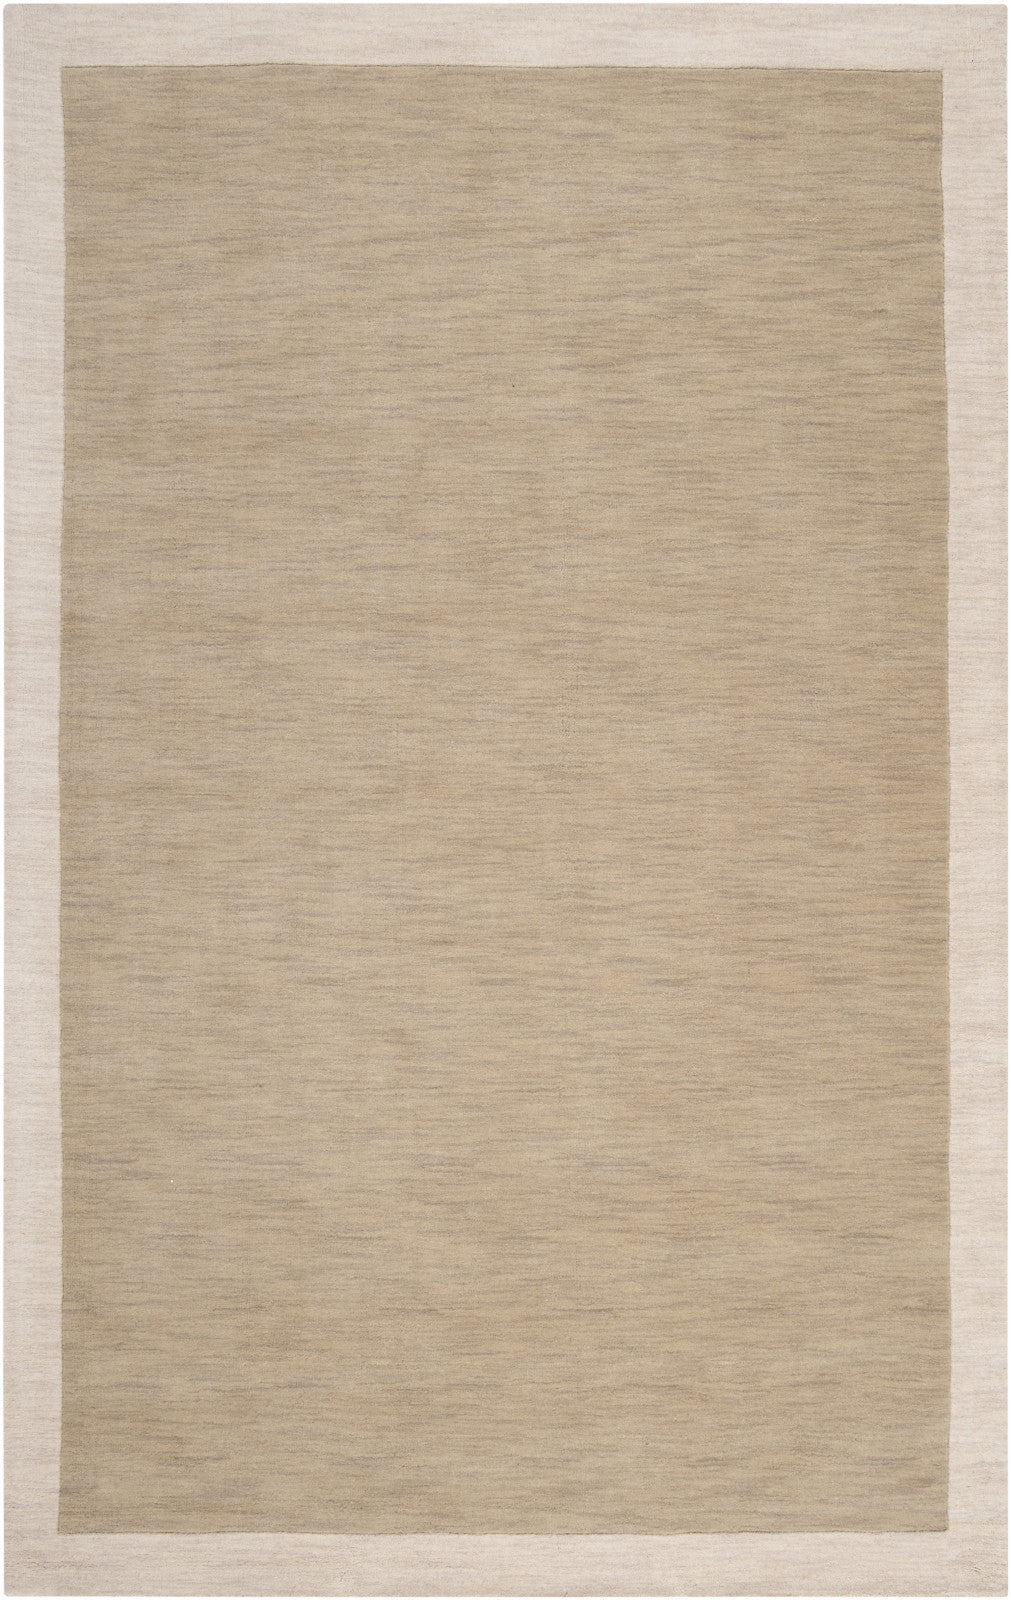 Surya Madison Square MDS-1003 Area Rug by angelo:HOME